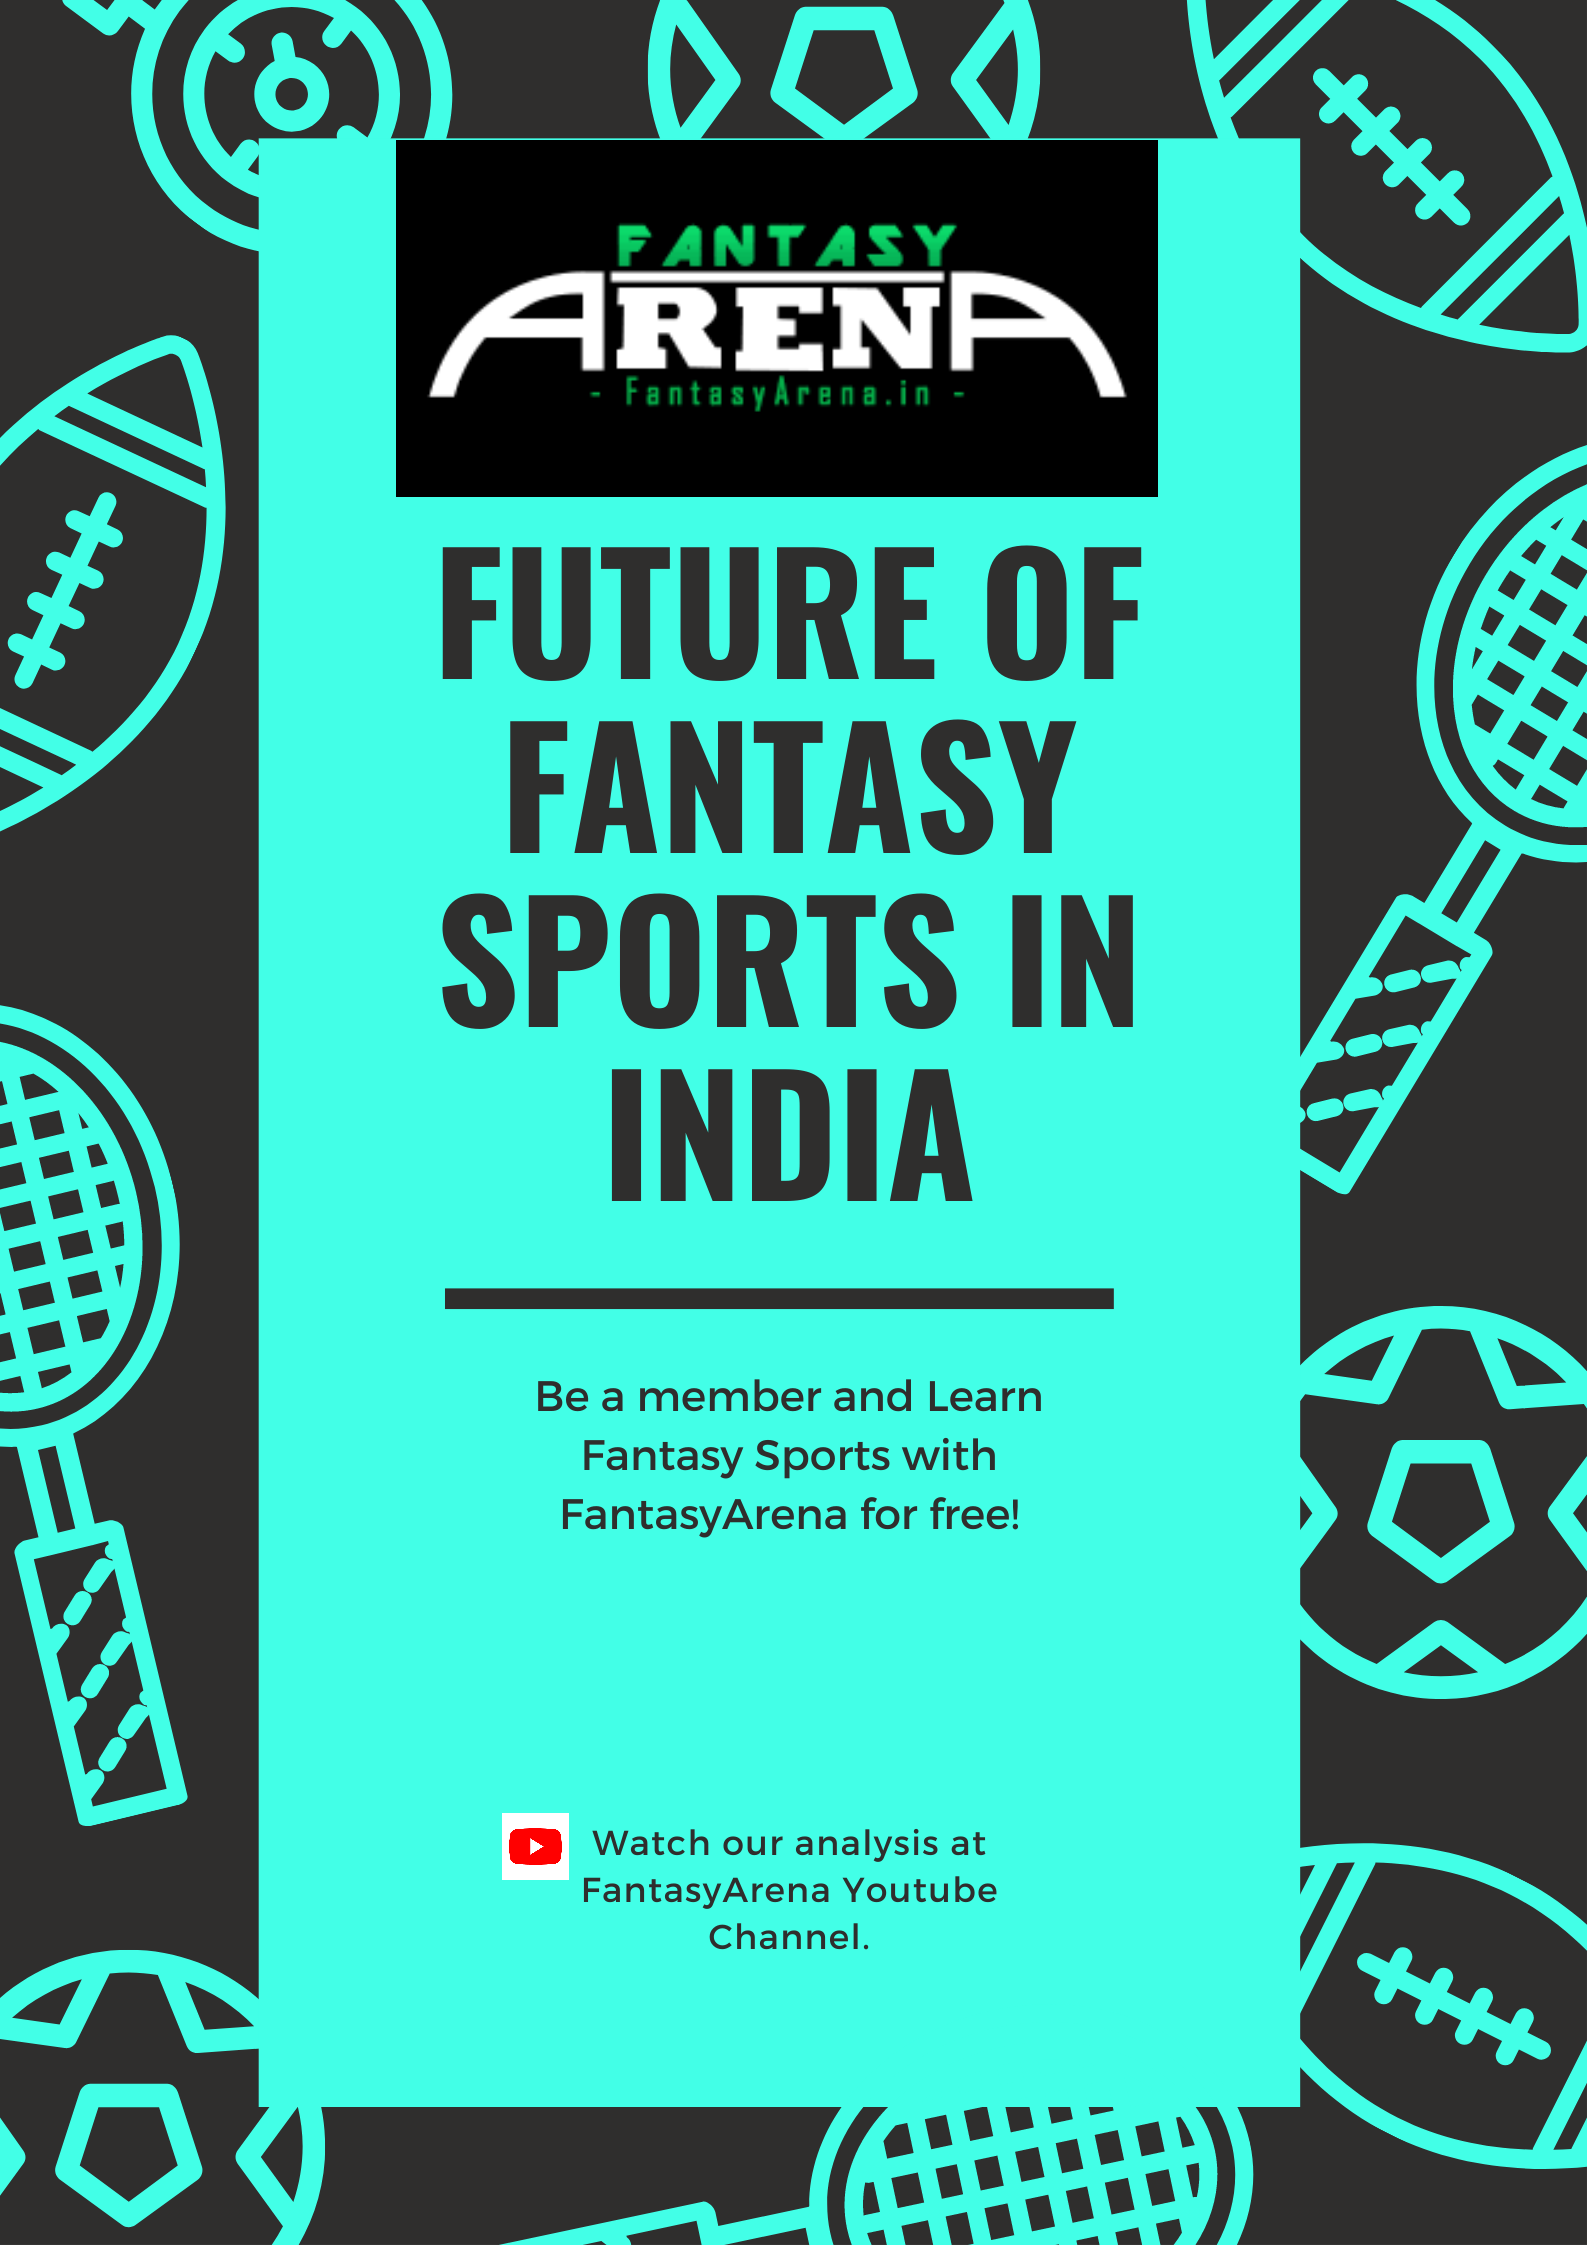 Title: Future of the fantasy sports in India.